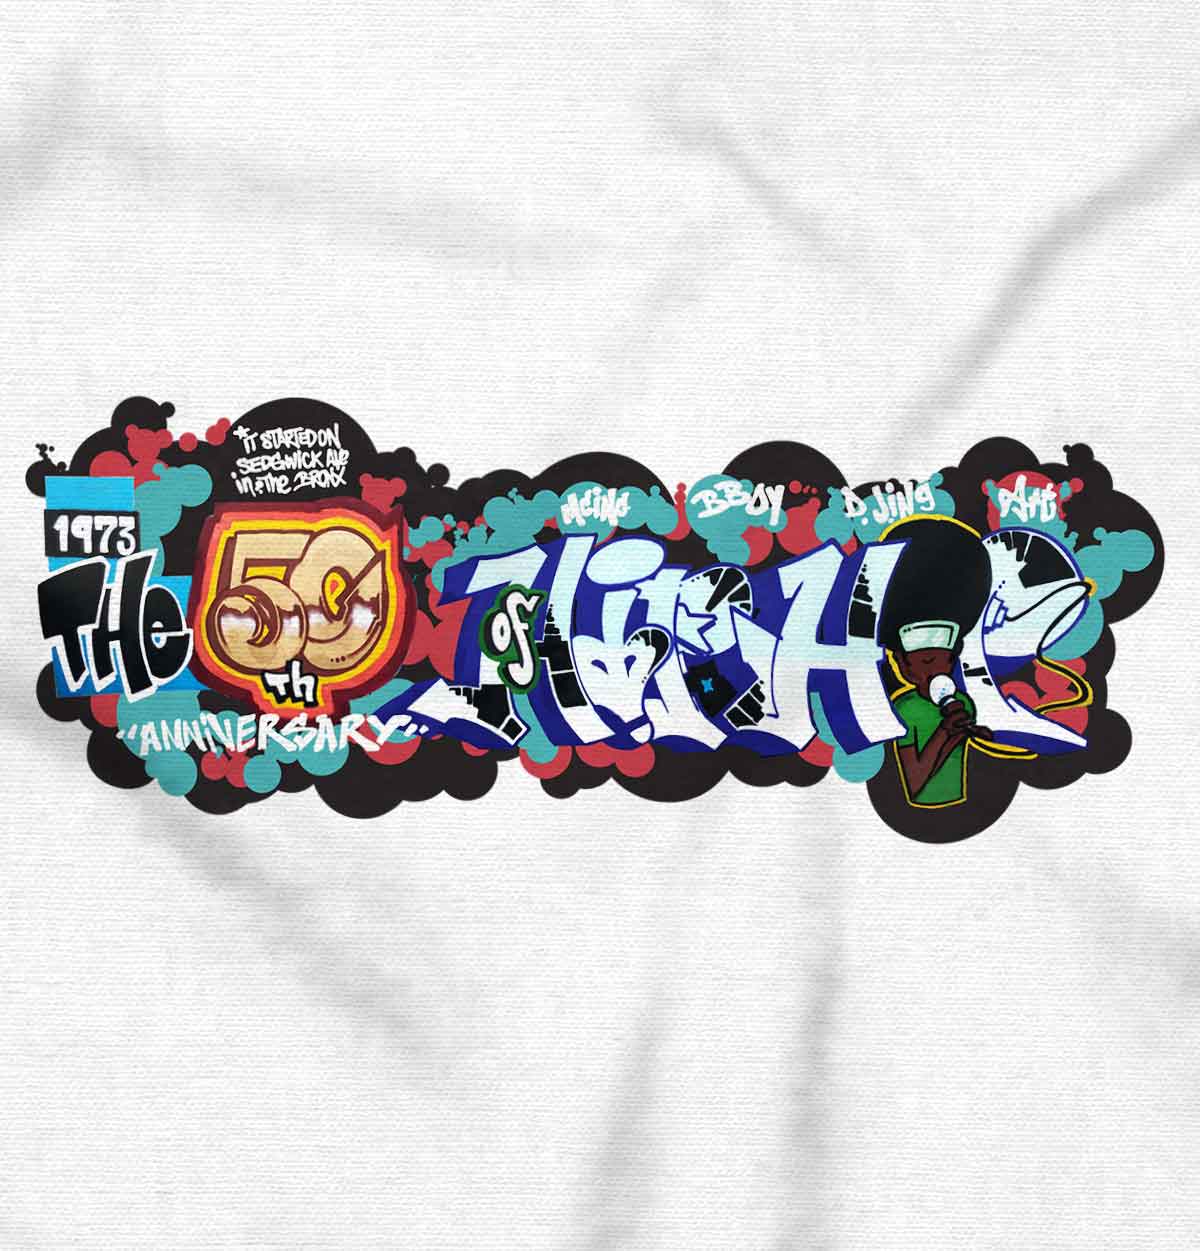 This image depicts vibrant graffiti art celebrating the 50th anniversary of Hip Hop, capturing its energy and creativity, and allowing you to embrace its rhythm, soul, and history through your style.